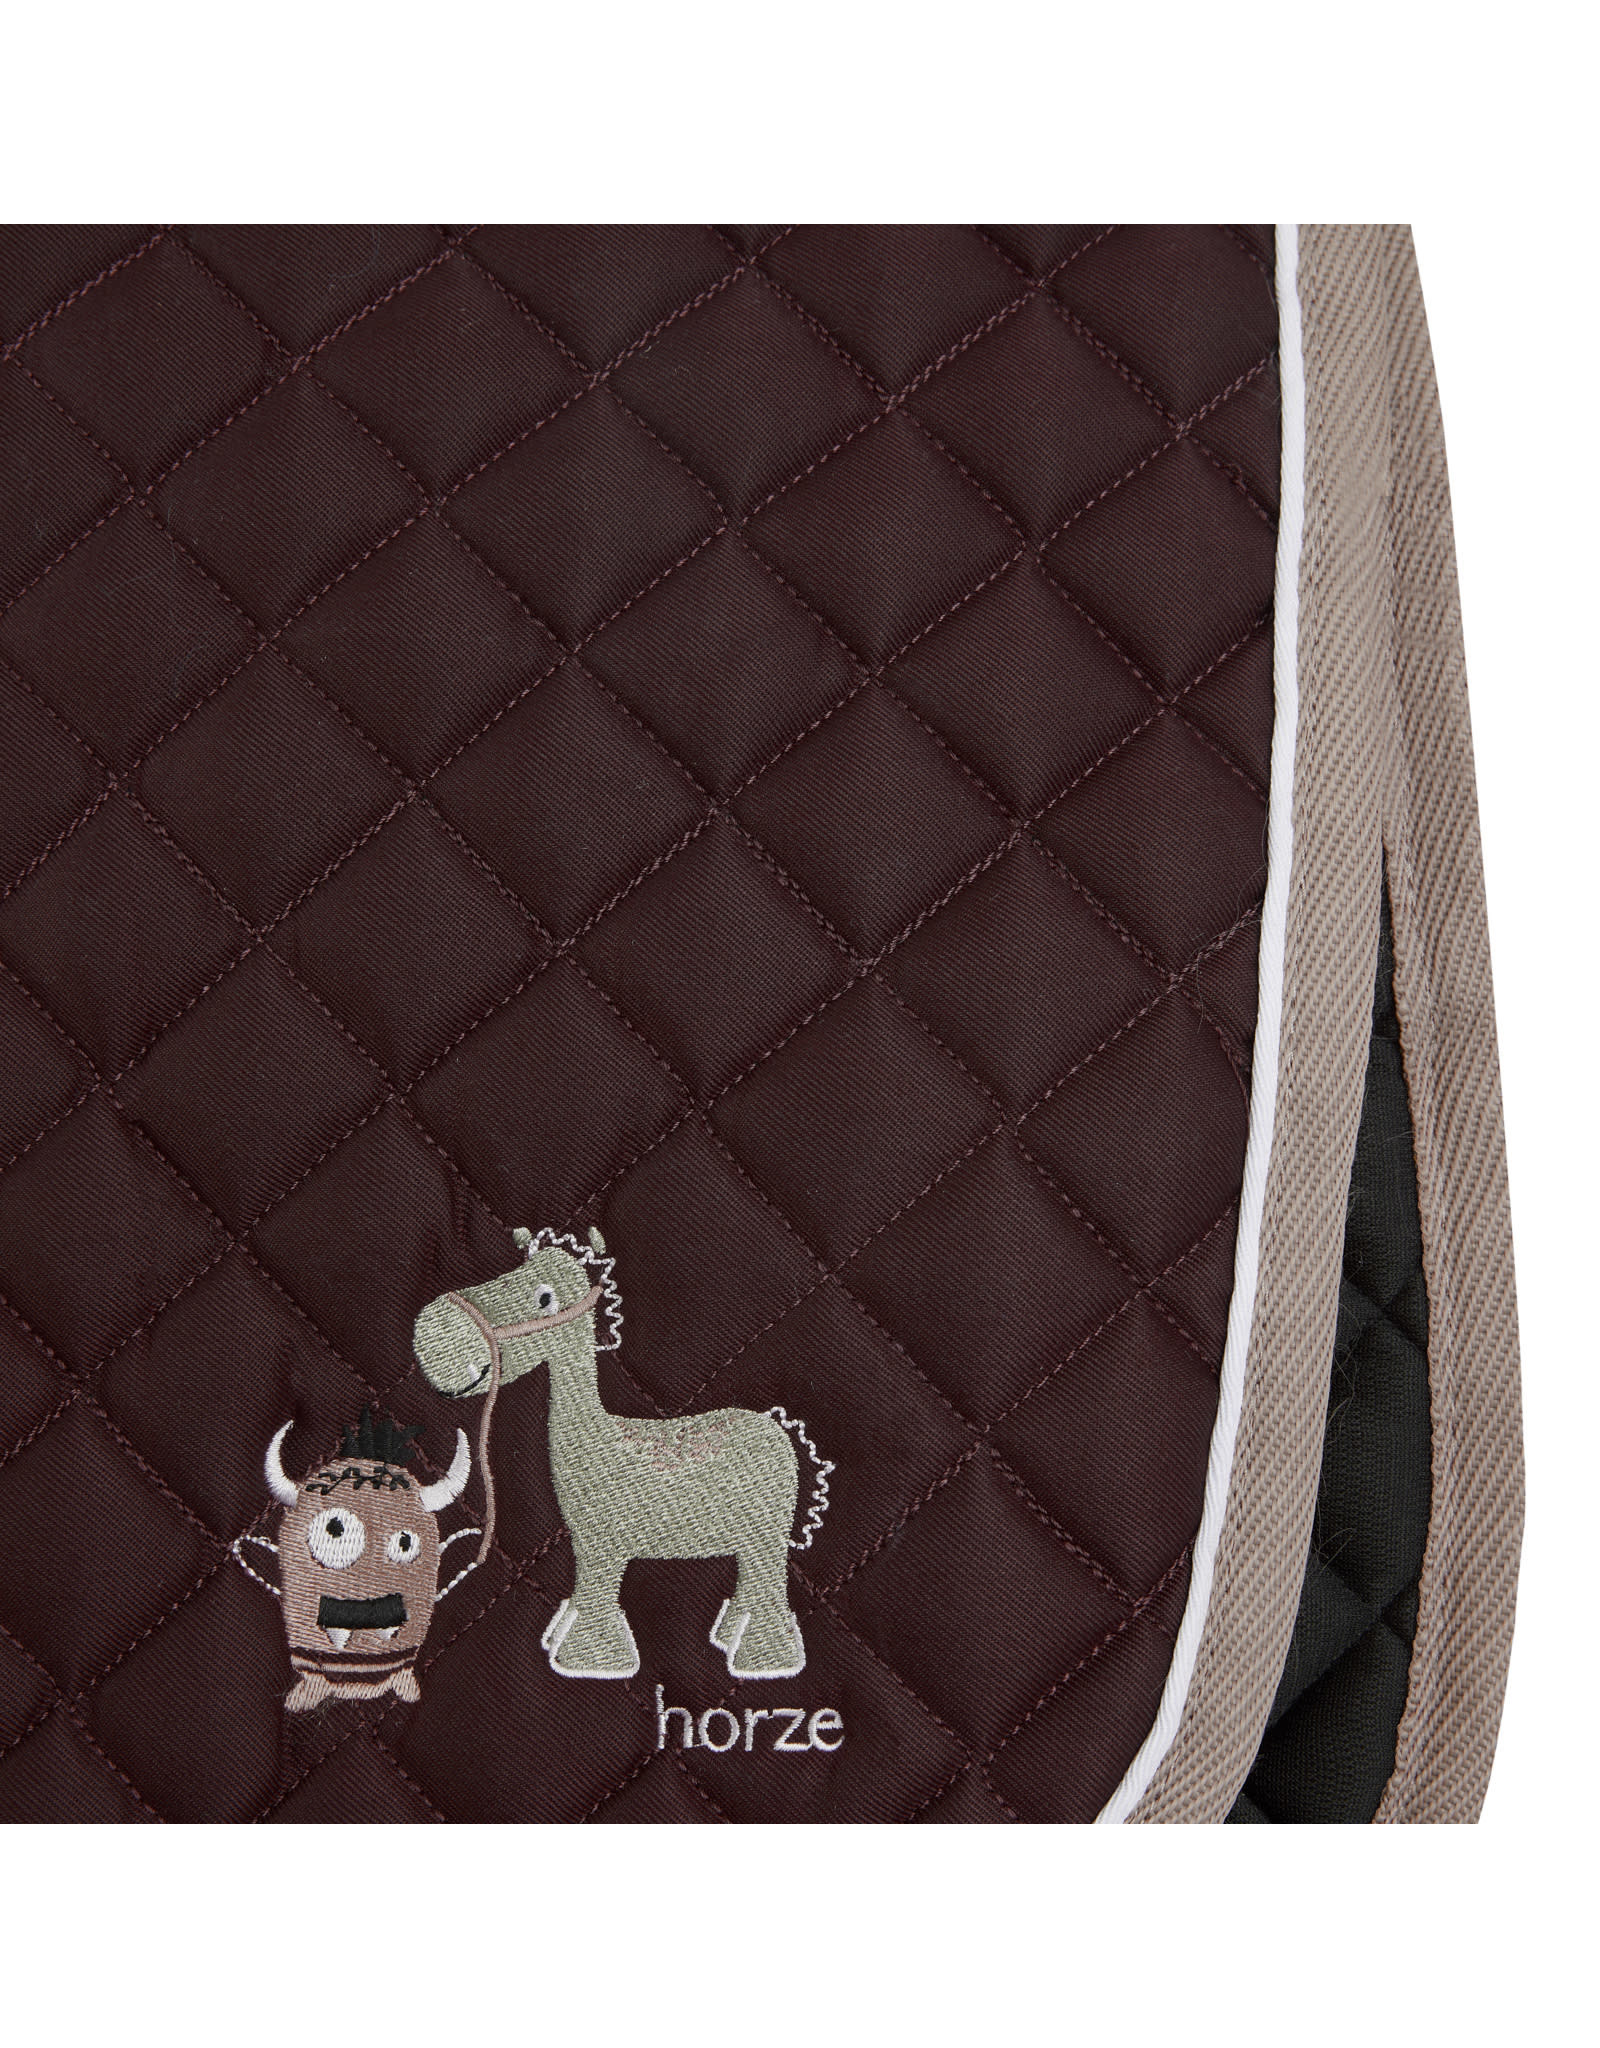 Horze Monster Pony Saddle Pad with Embroidery Fig Purple